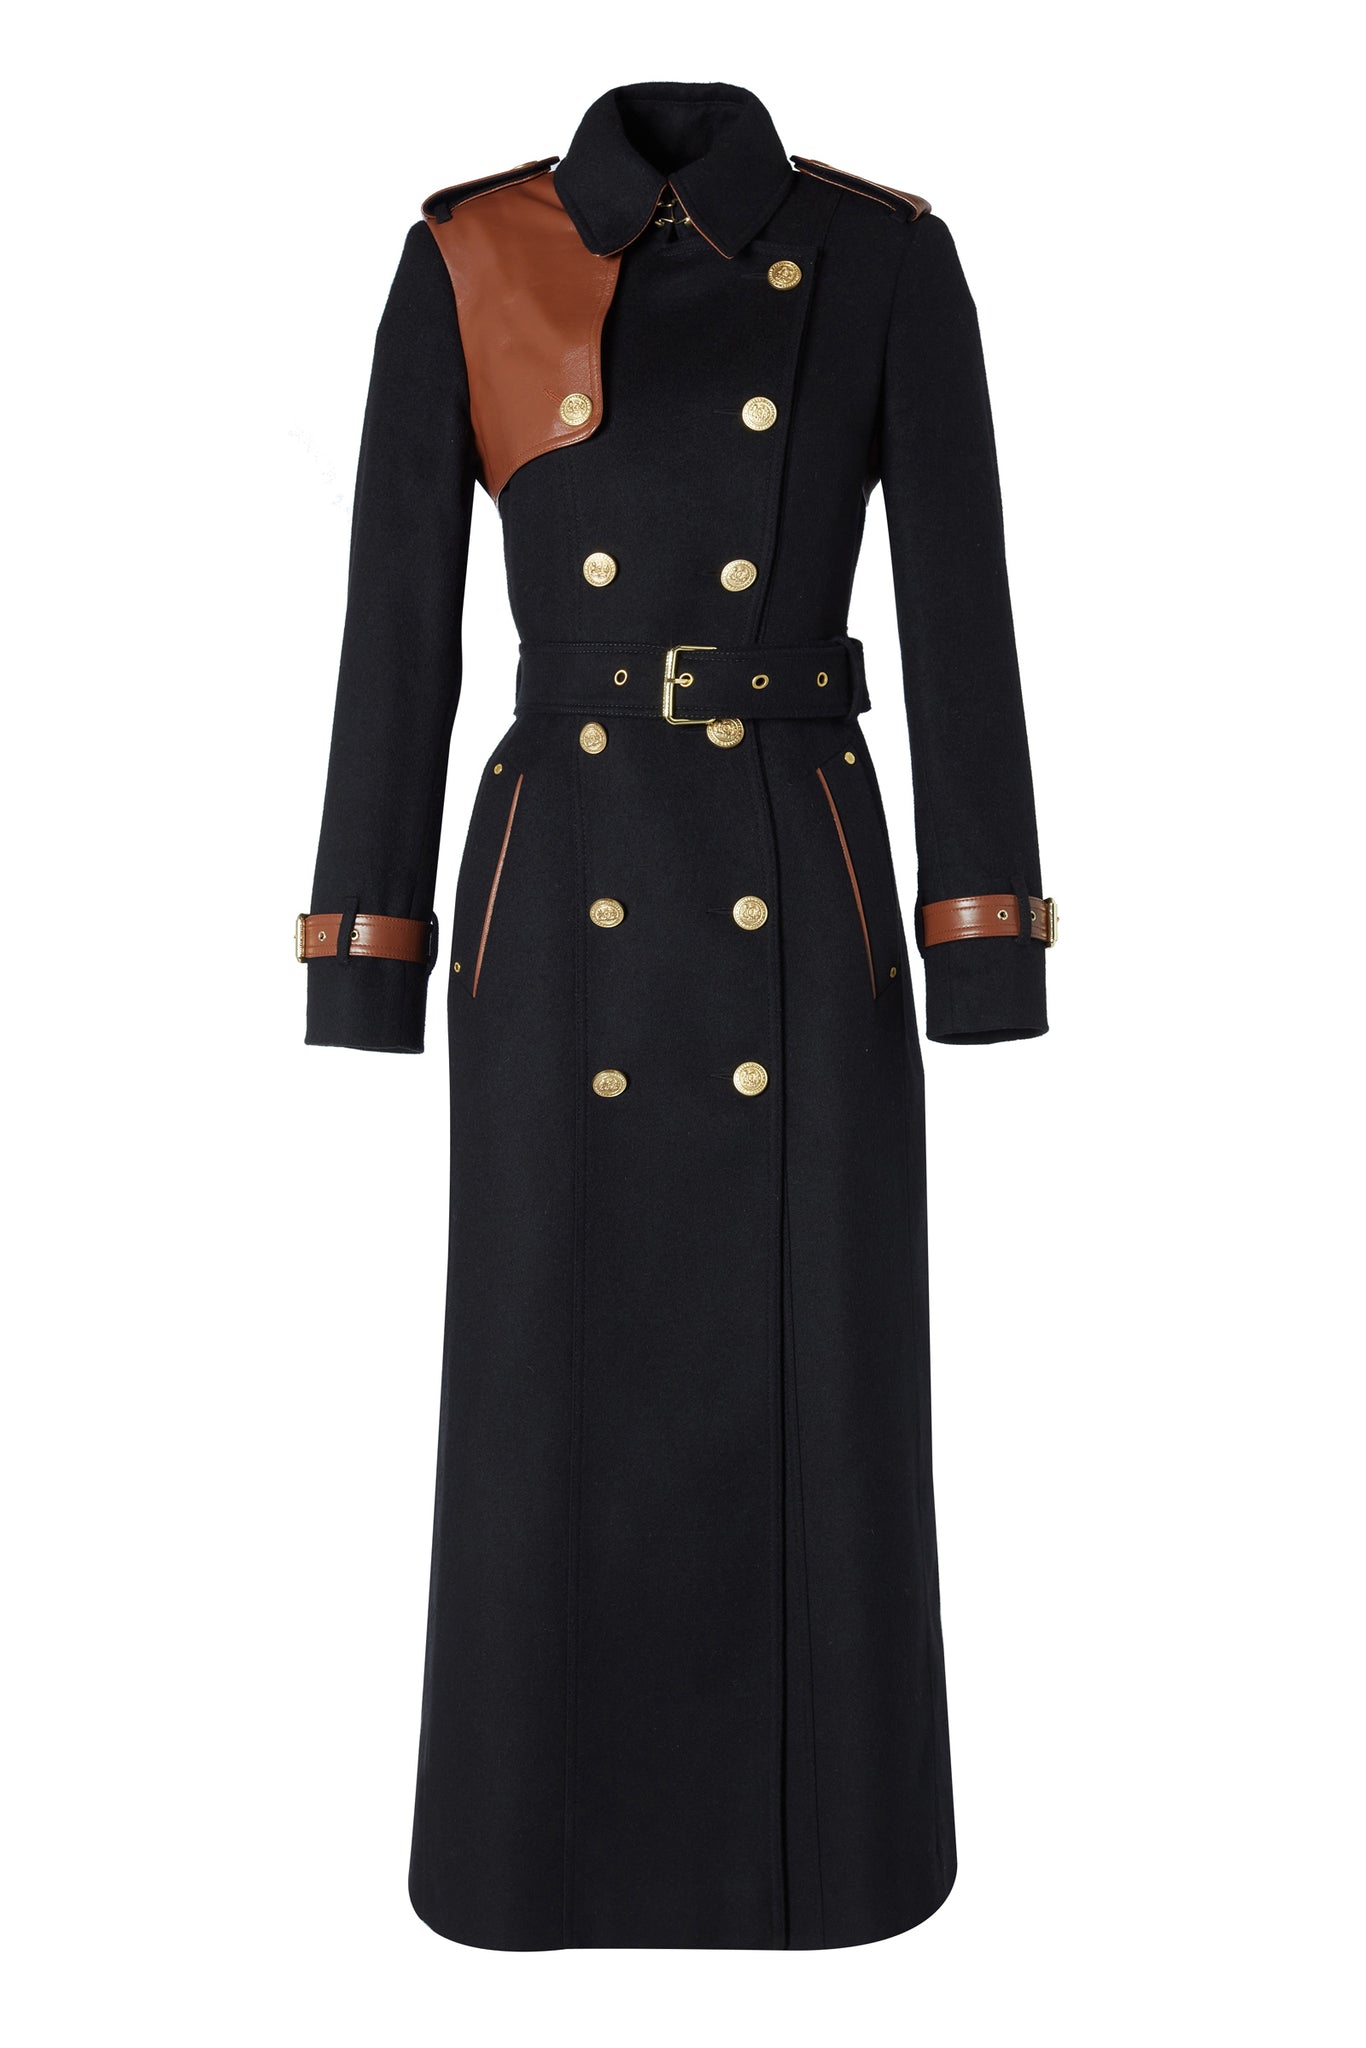 Front fully buttoned womens black wool and tan leather double breasted full length trench coat 